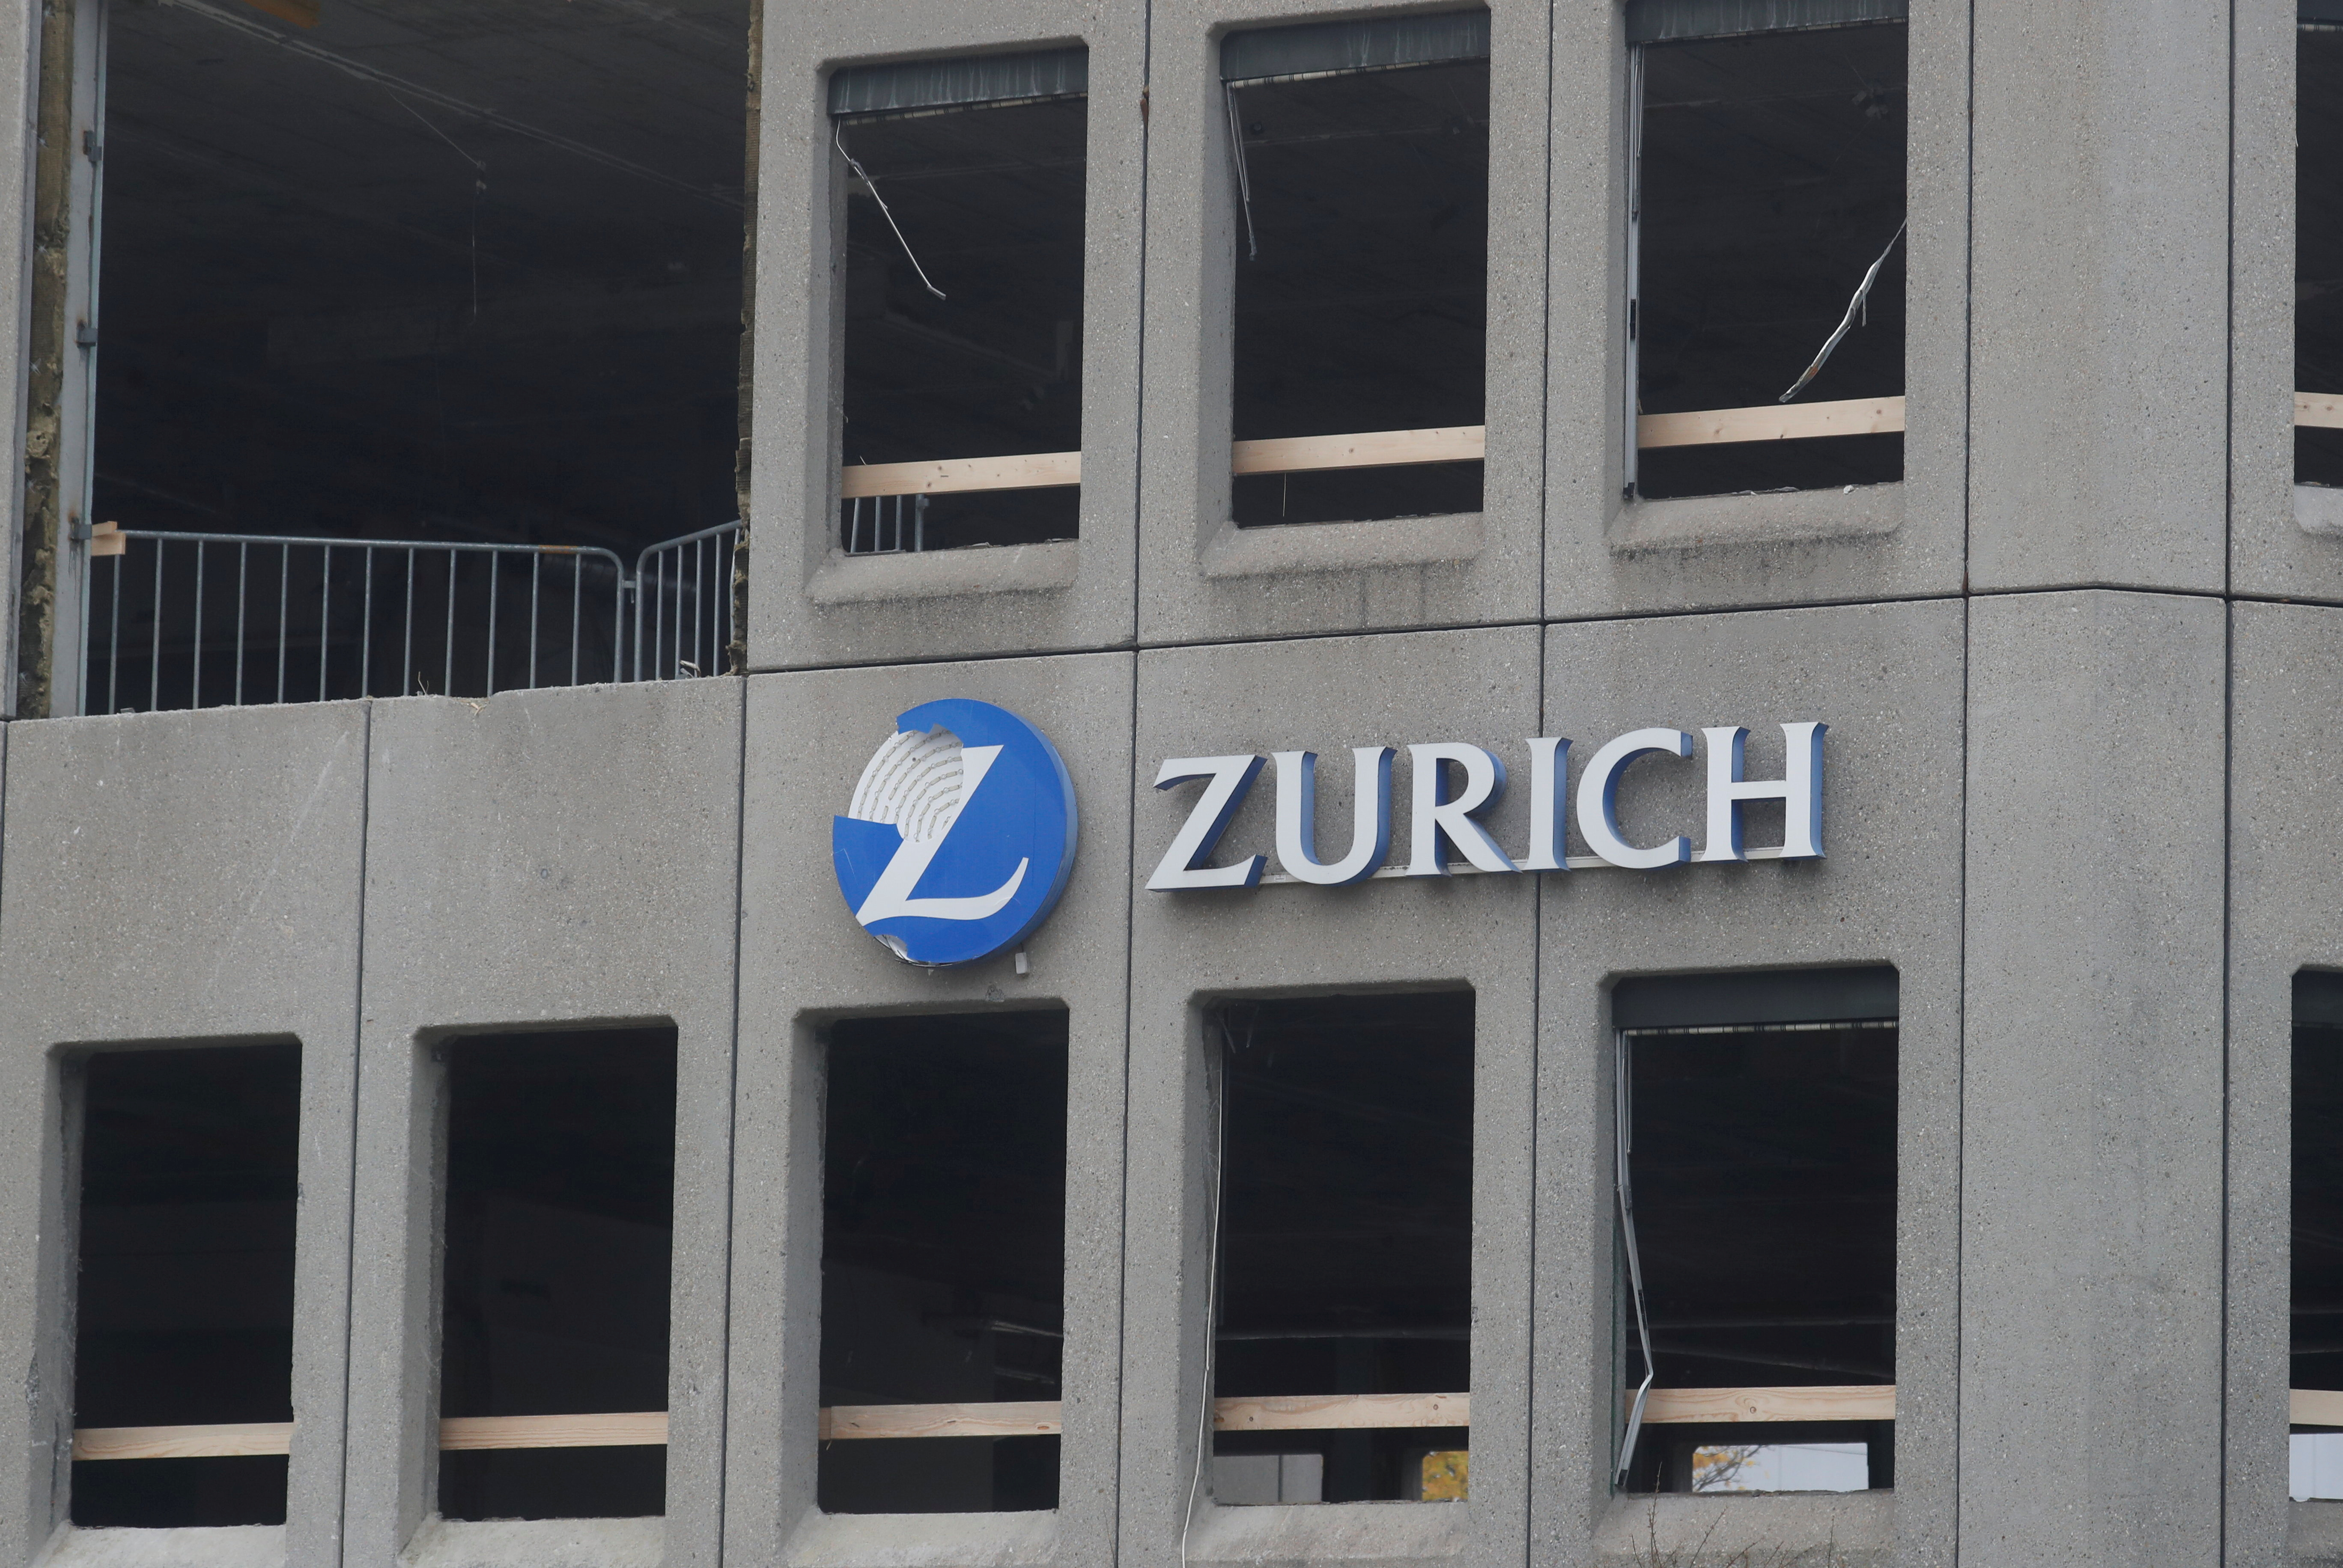 Logo of Zurich Insurance is seen at a former office building in Zurich